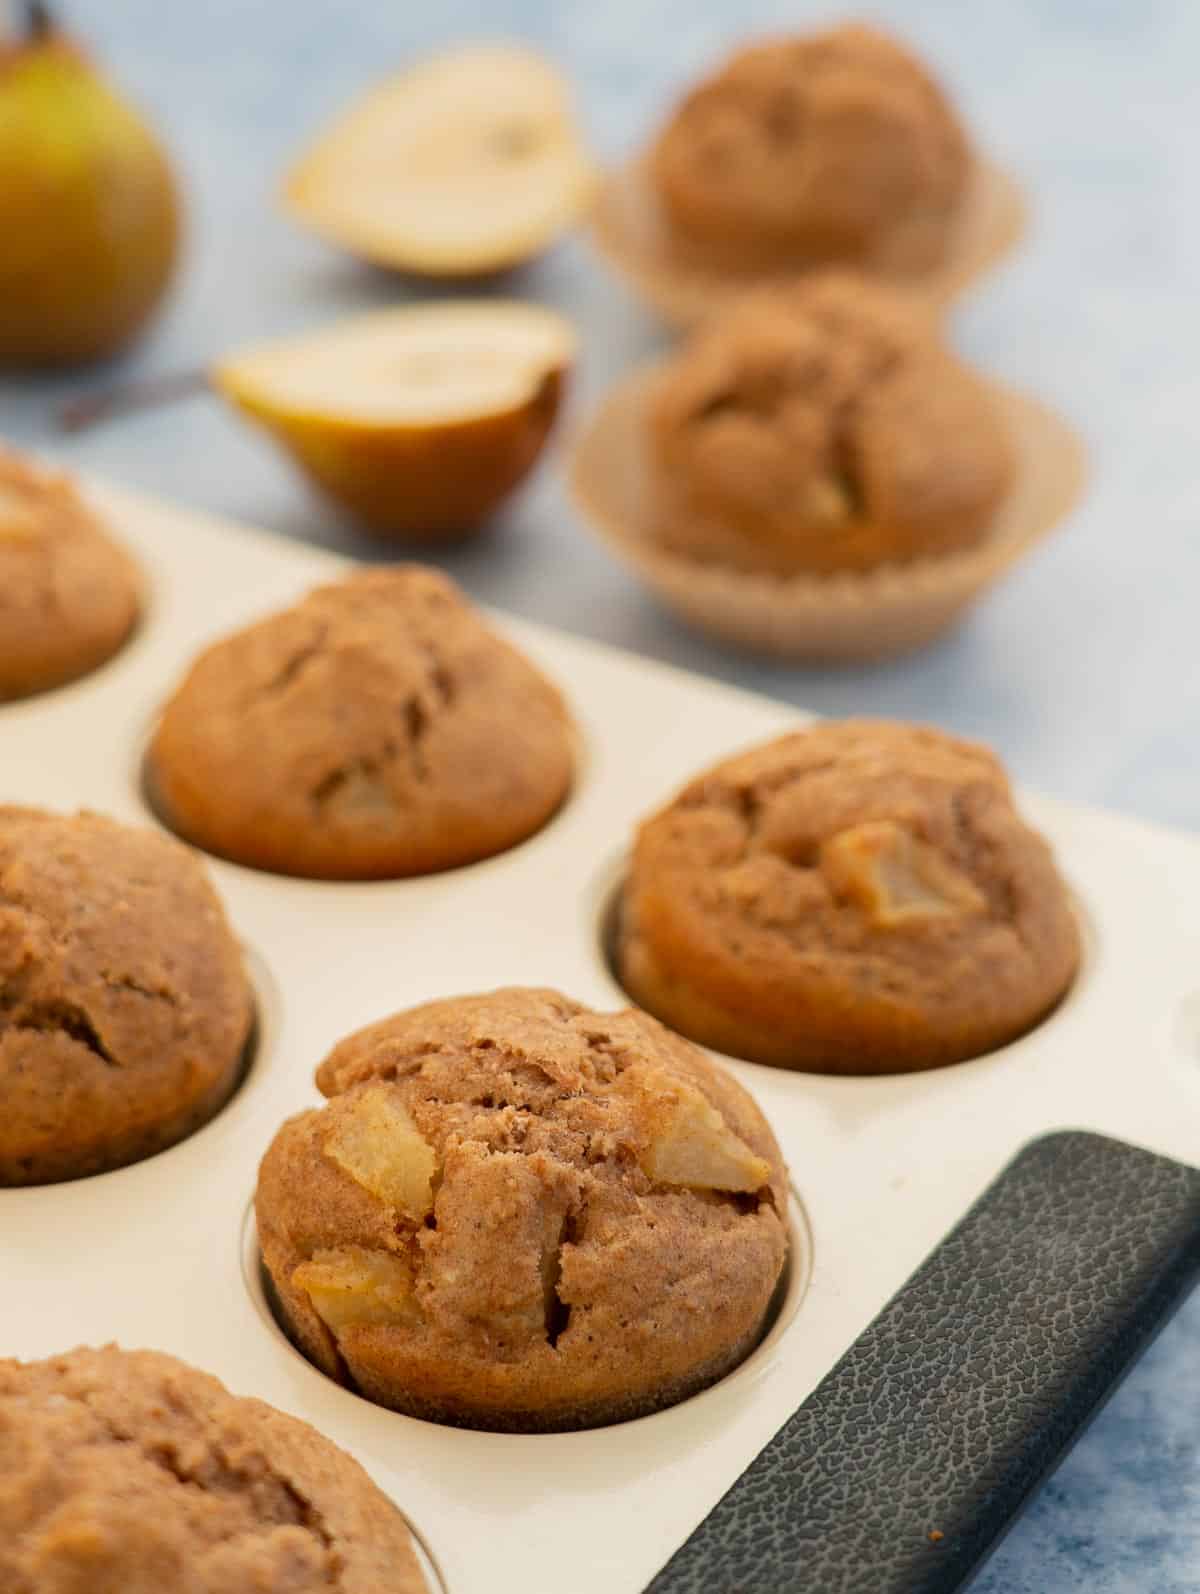 muffins in a cream muffin tin, chunks of diced pear visible on the top of the muffins